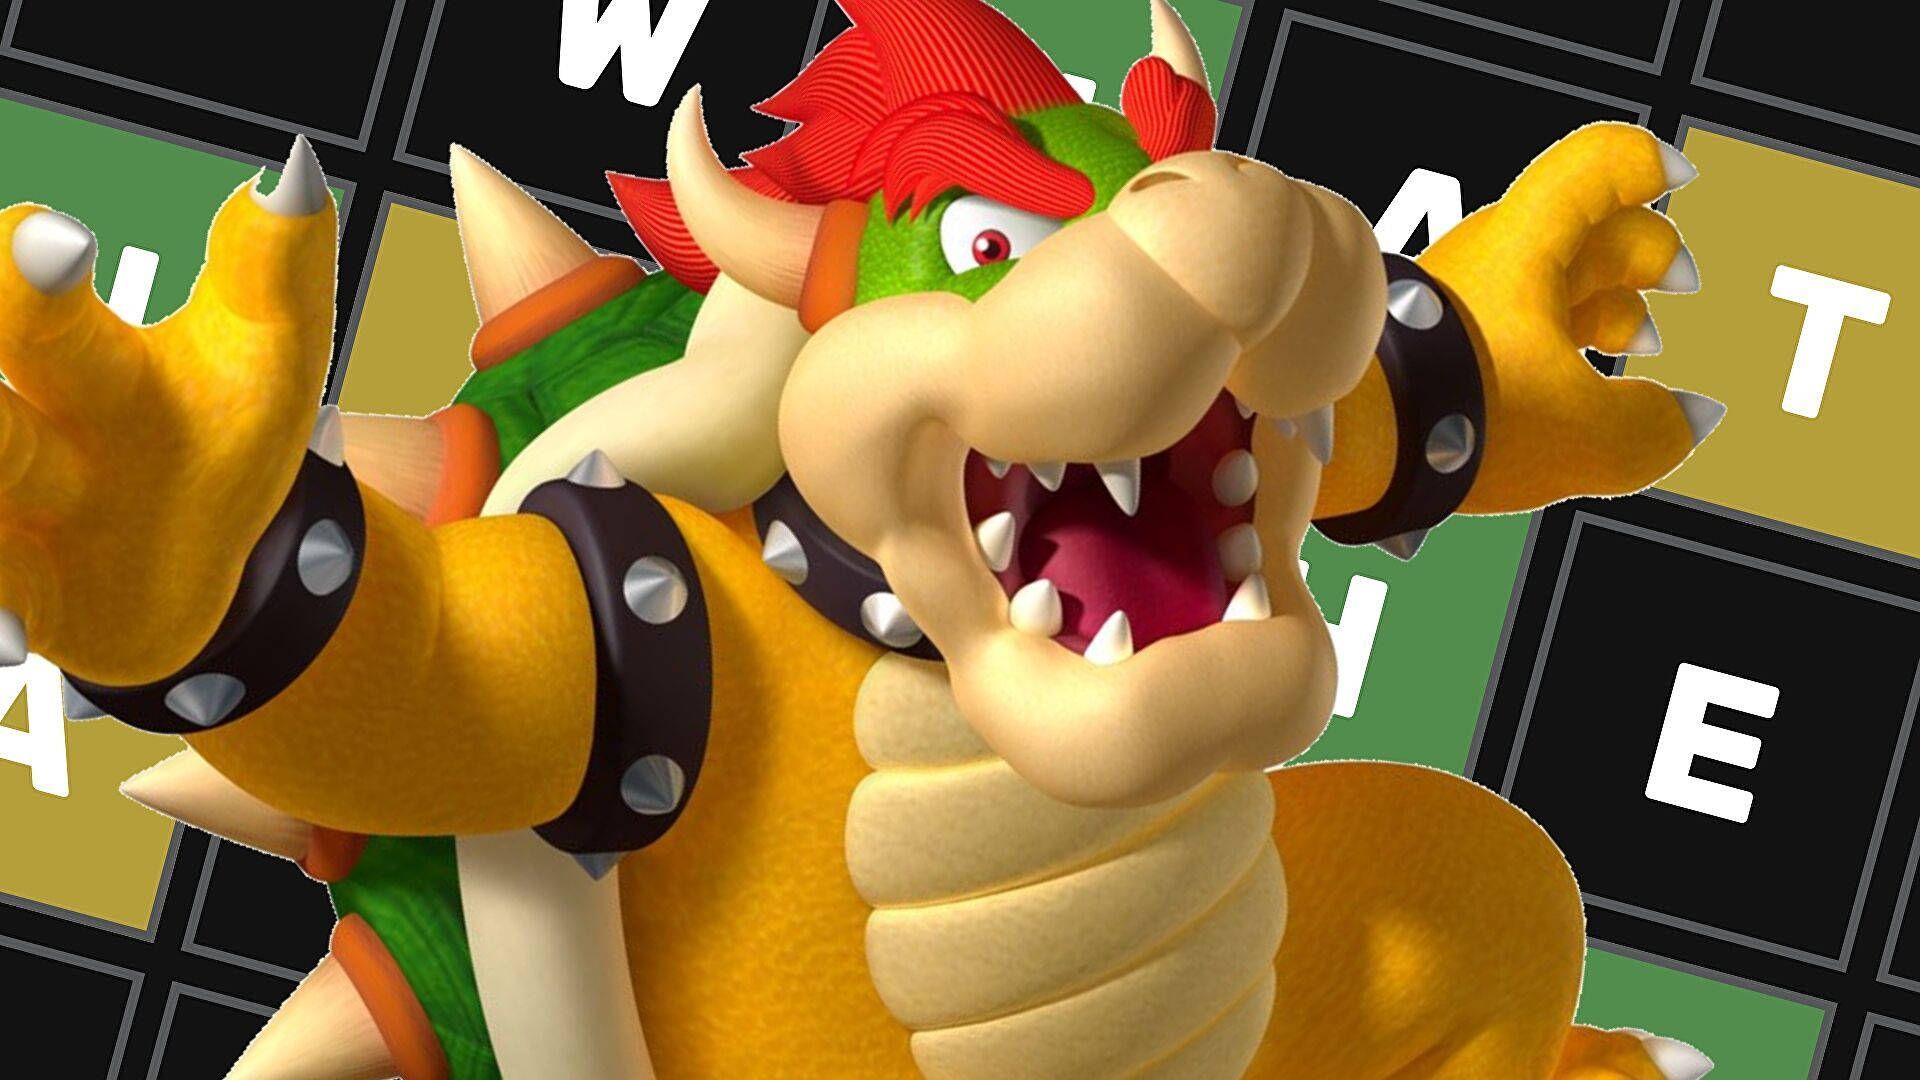 A close up of the wii u game character - Bowser